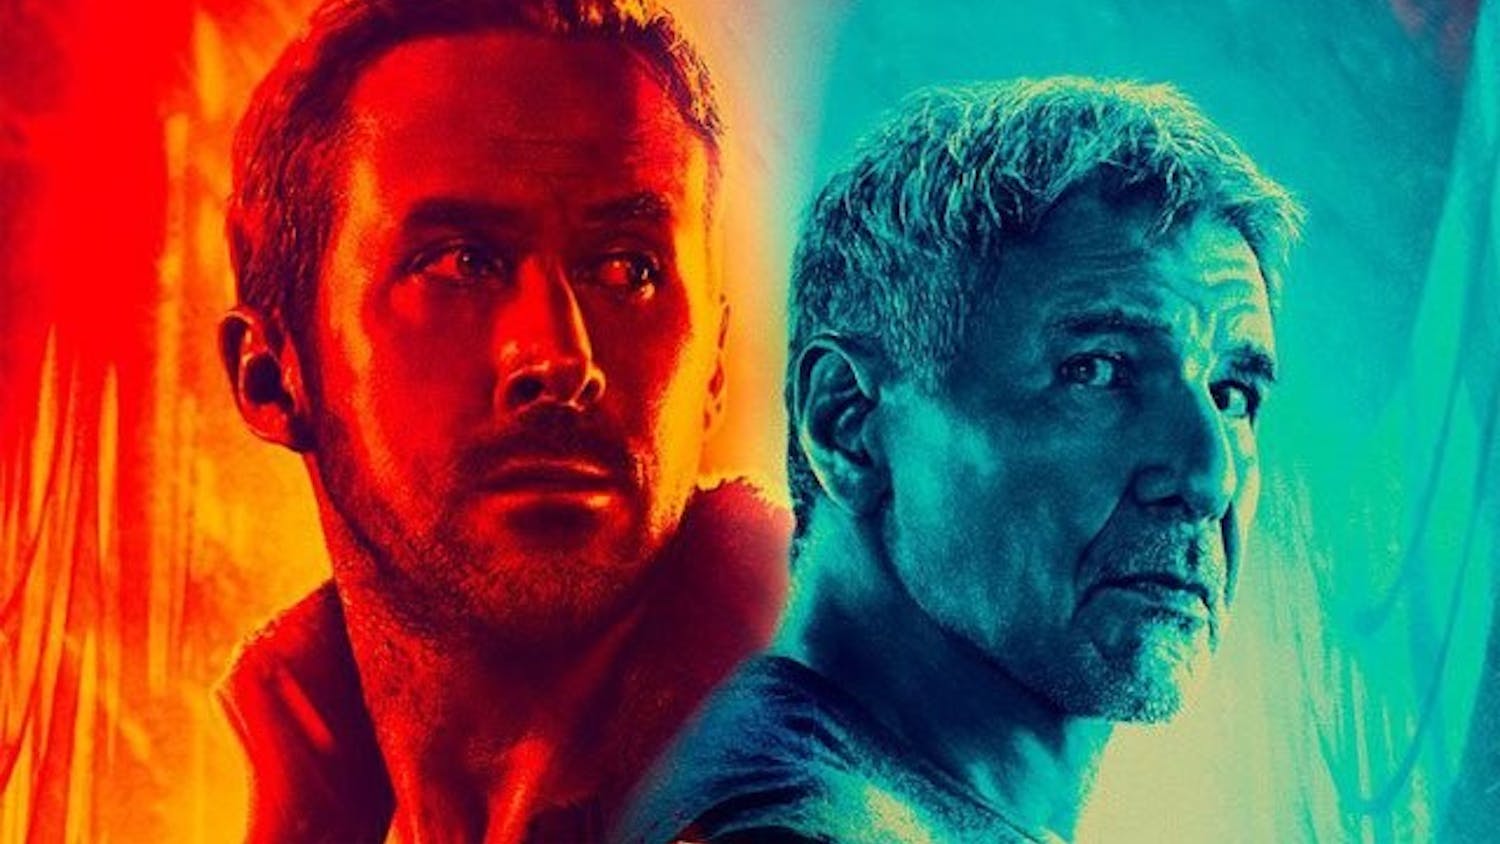 Ryan Gosling and Harrison Ford star in "Blade Runner 2049," a follow-up to the 1982 original film.